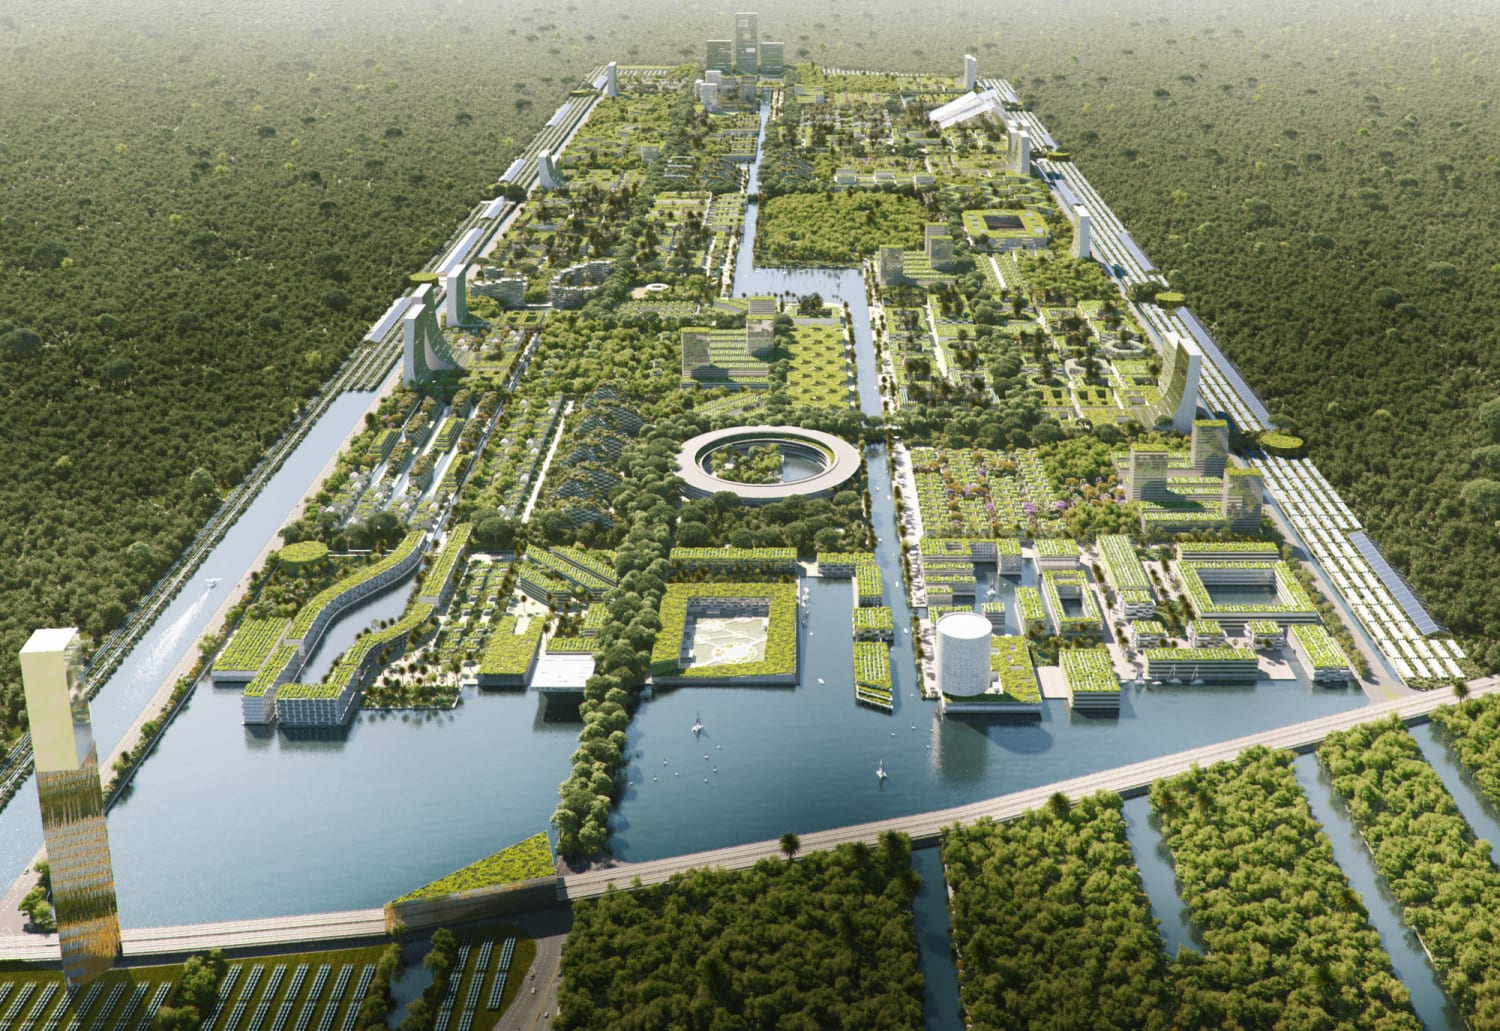 First Smart Forest City in Mexico Designed by Stefano Boeri Architetti